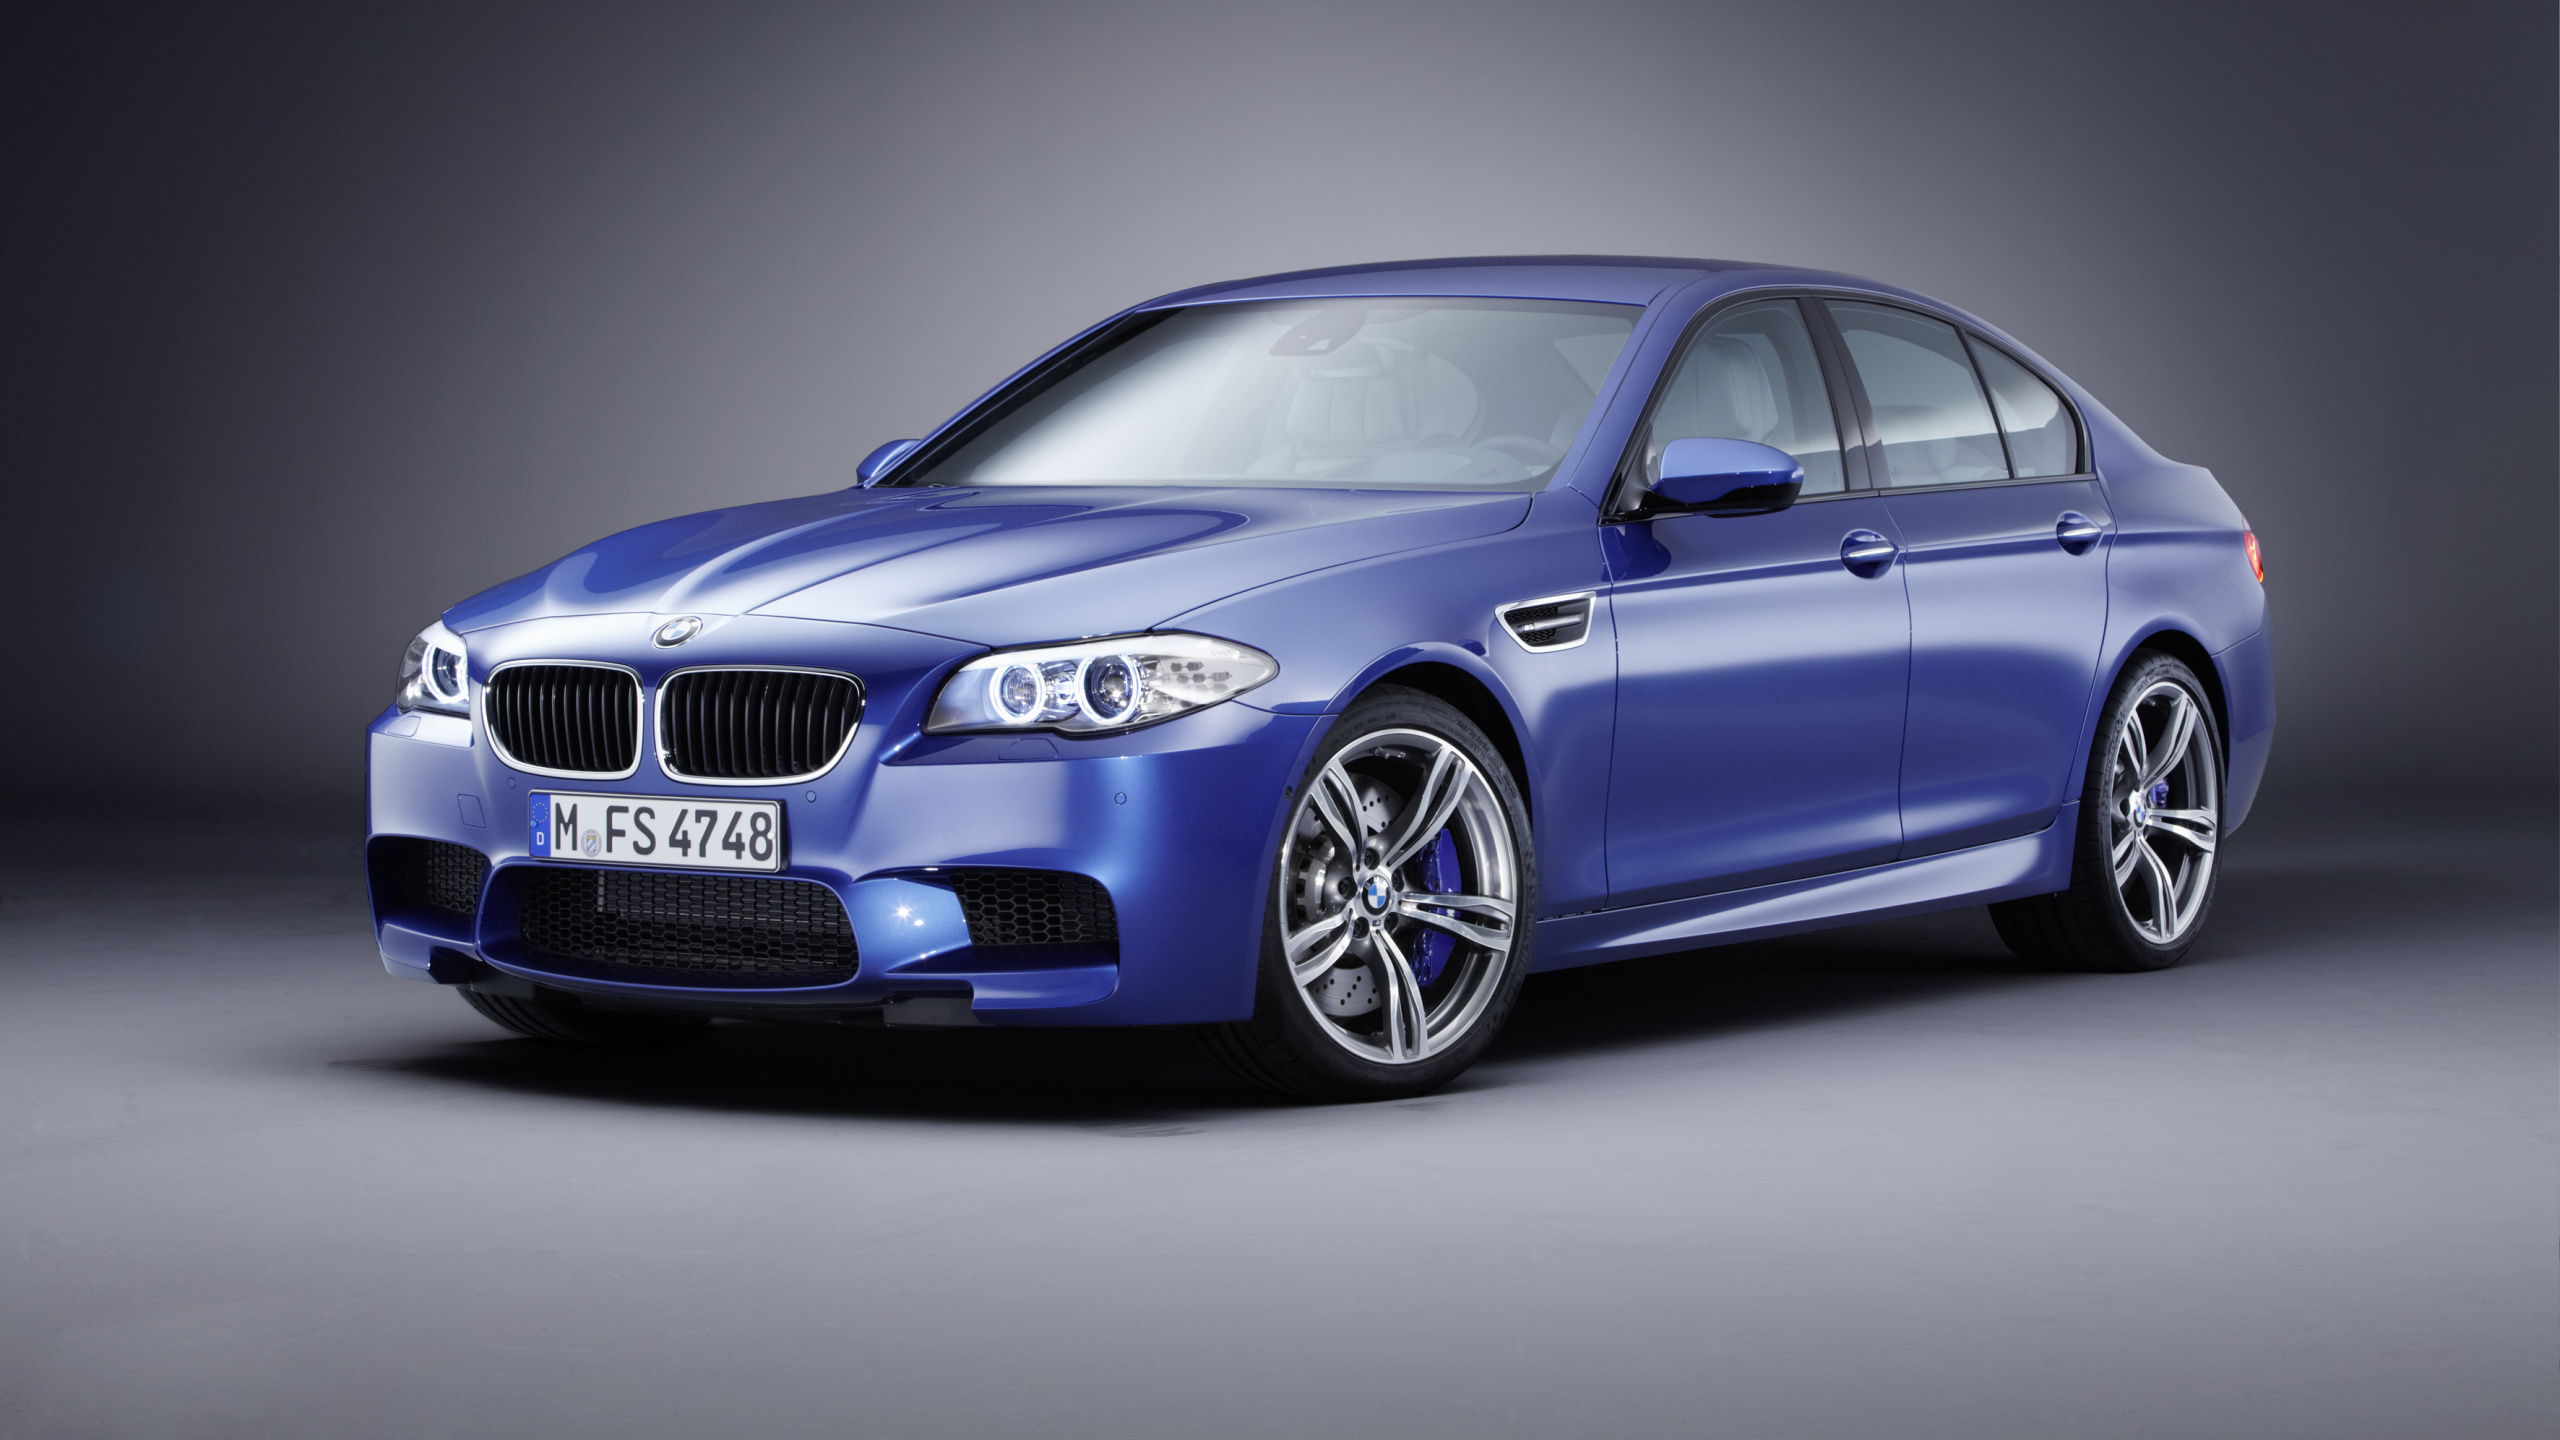 Blue Bmw m 3 Coupe. Wallpaper in 2560x1440 Resolution